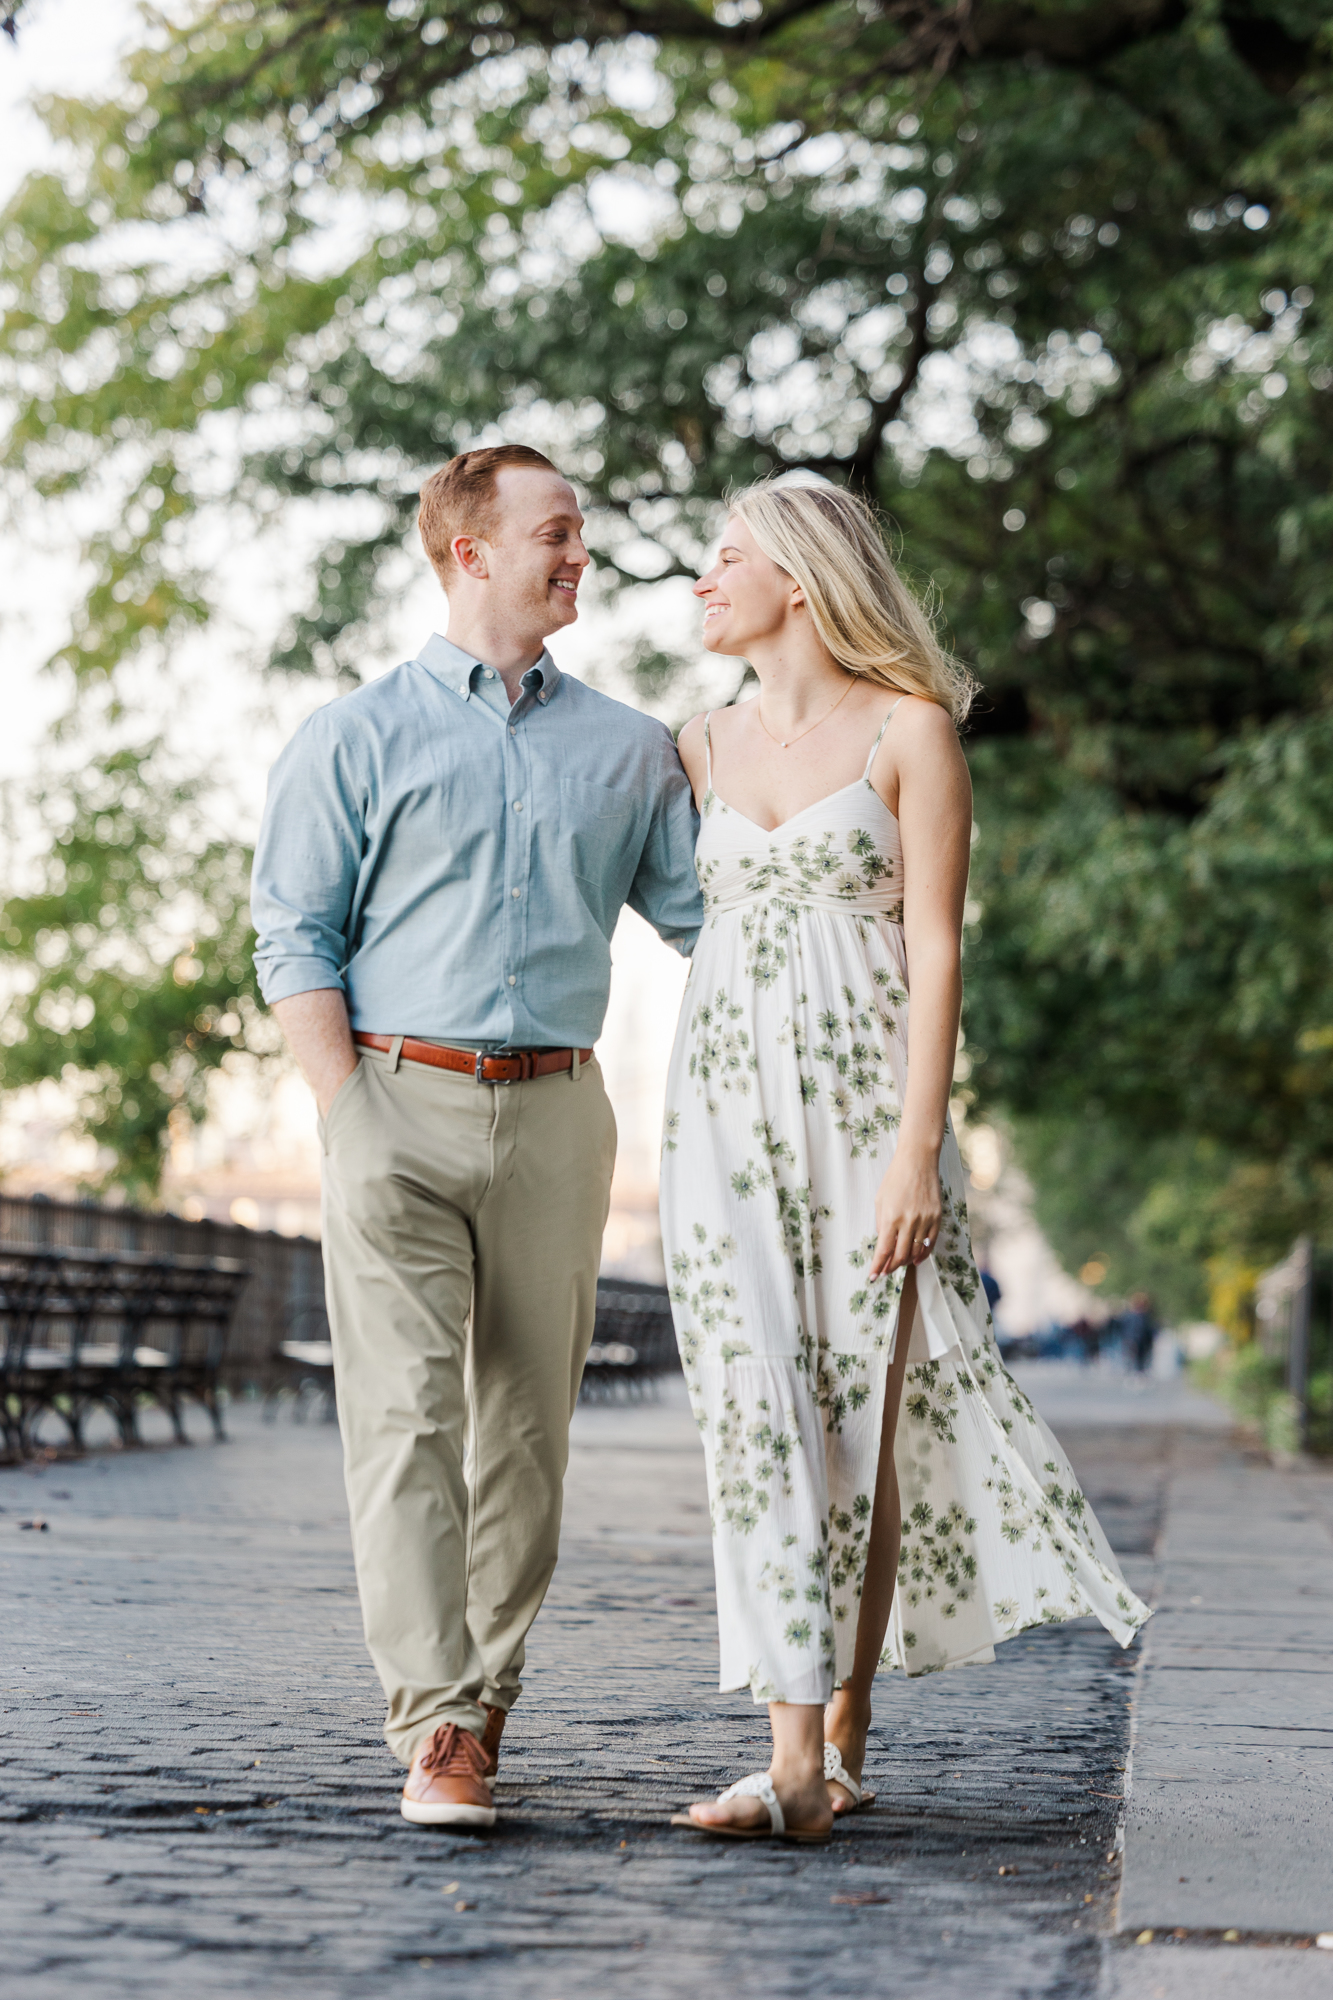 Playful Engagement Photos In Brooklyn Heights